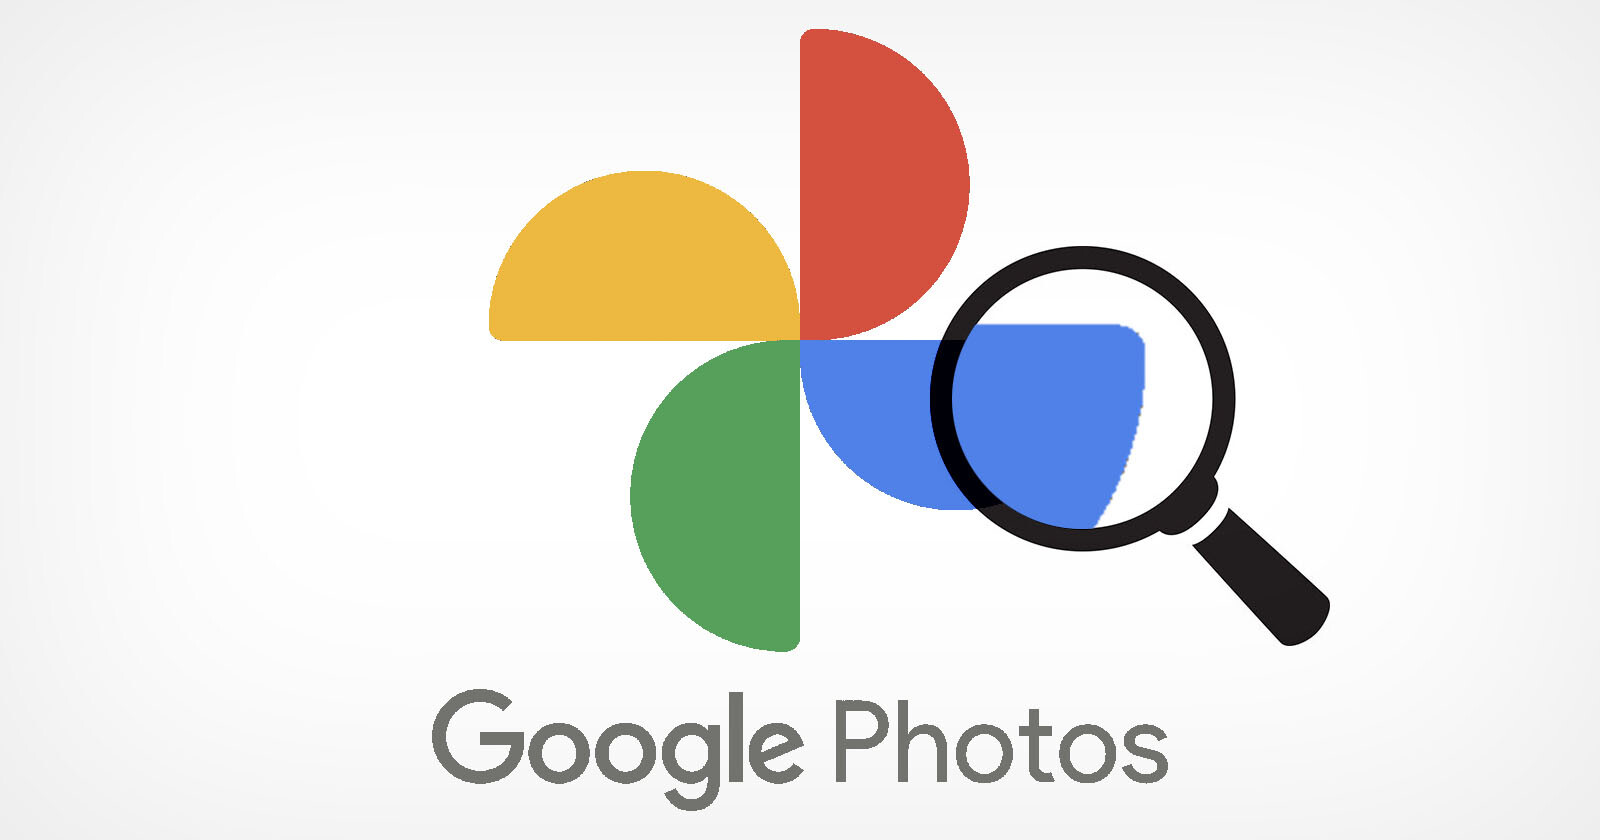 Google Photos Can Now Facially Recognize People From Behind